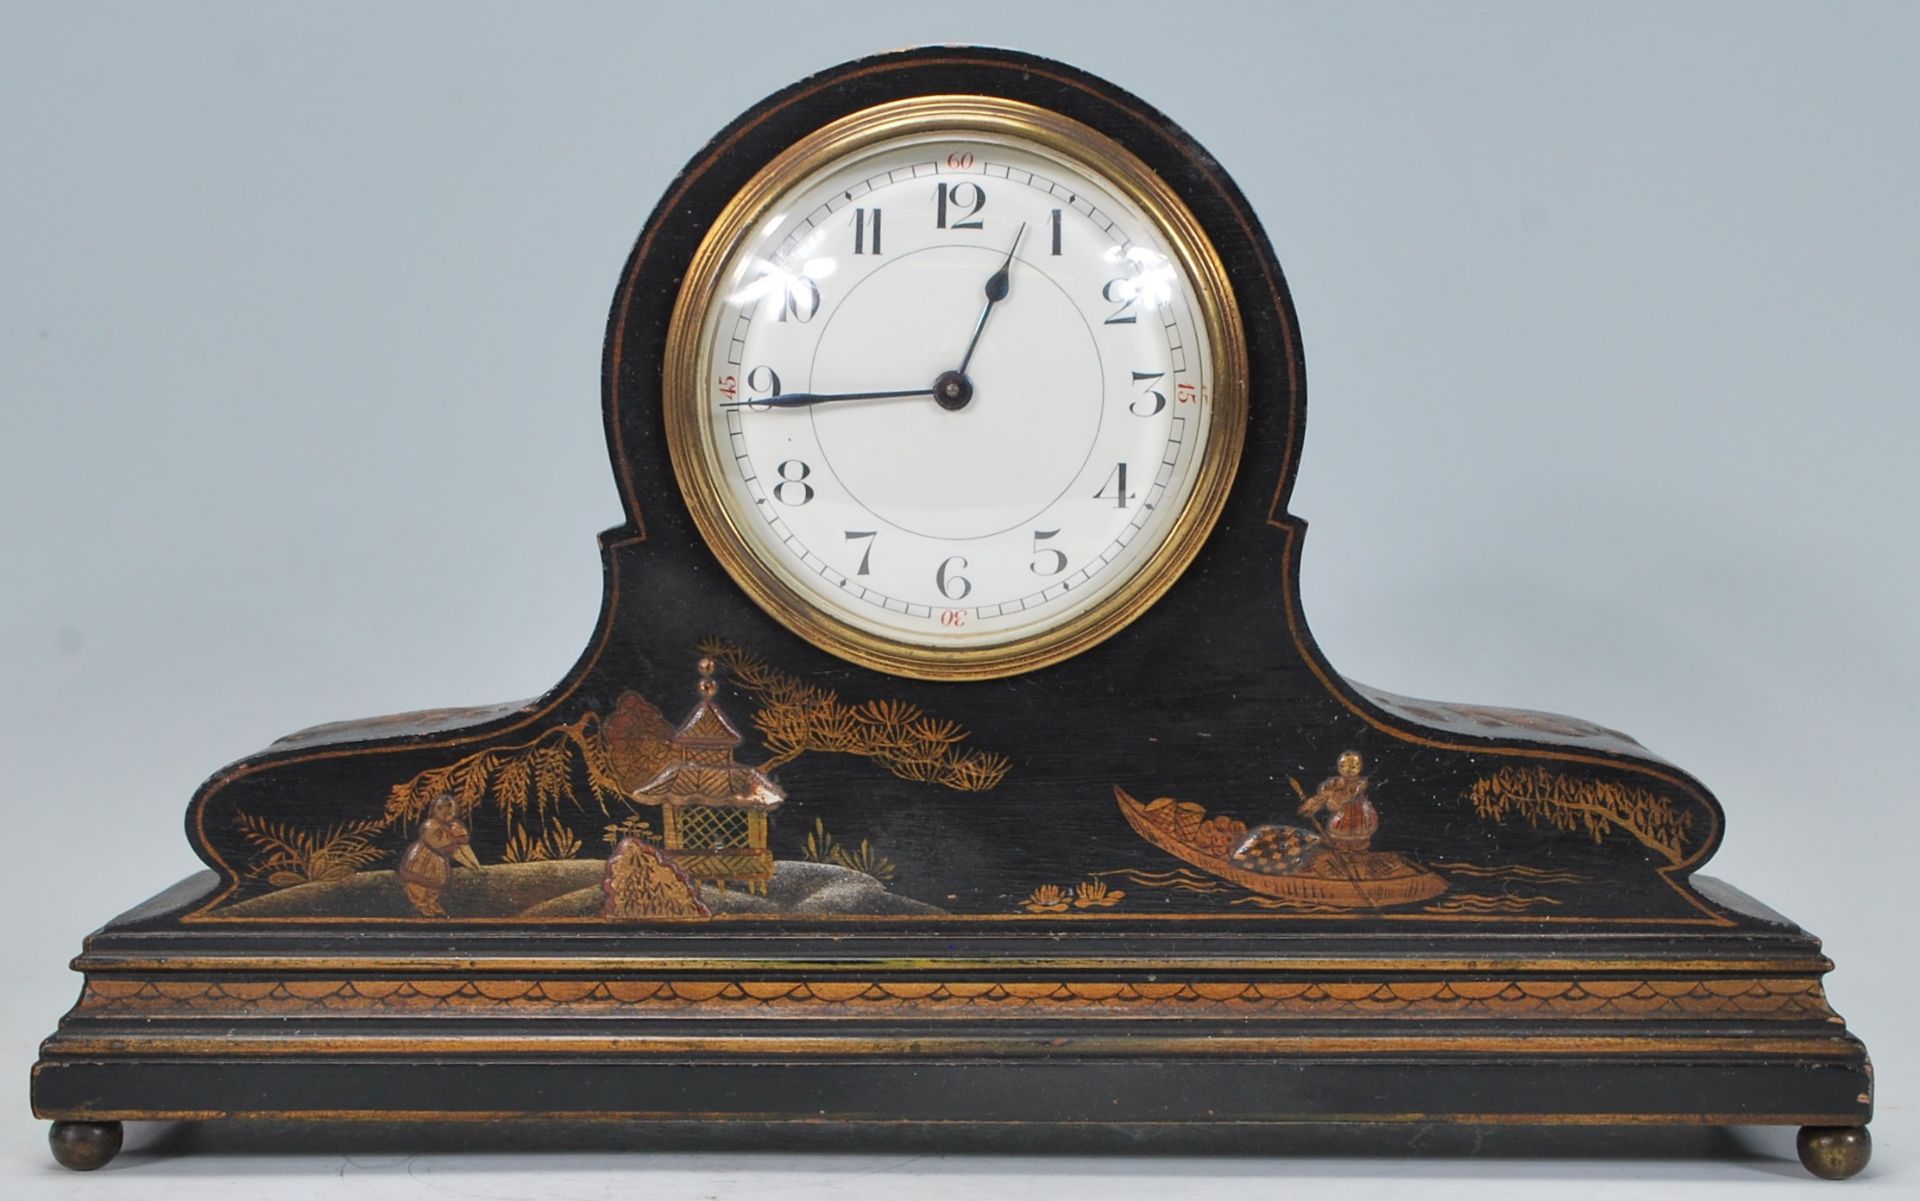 An early 20th century Japanned black lacquer and chinoiserie decorated dome top mantel clock in